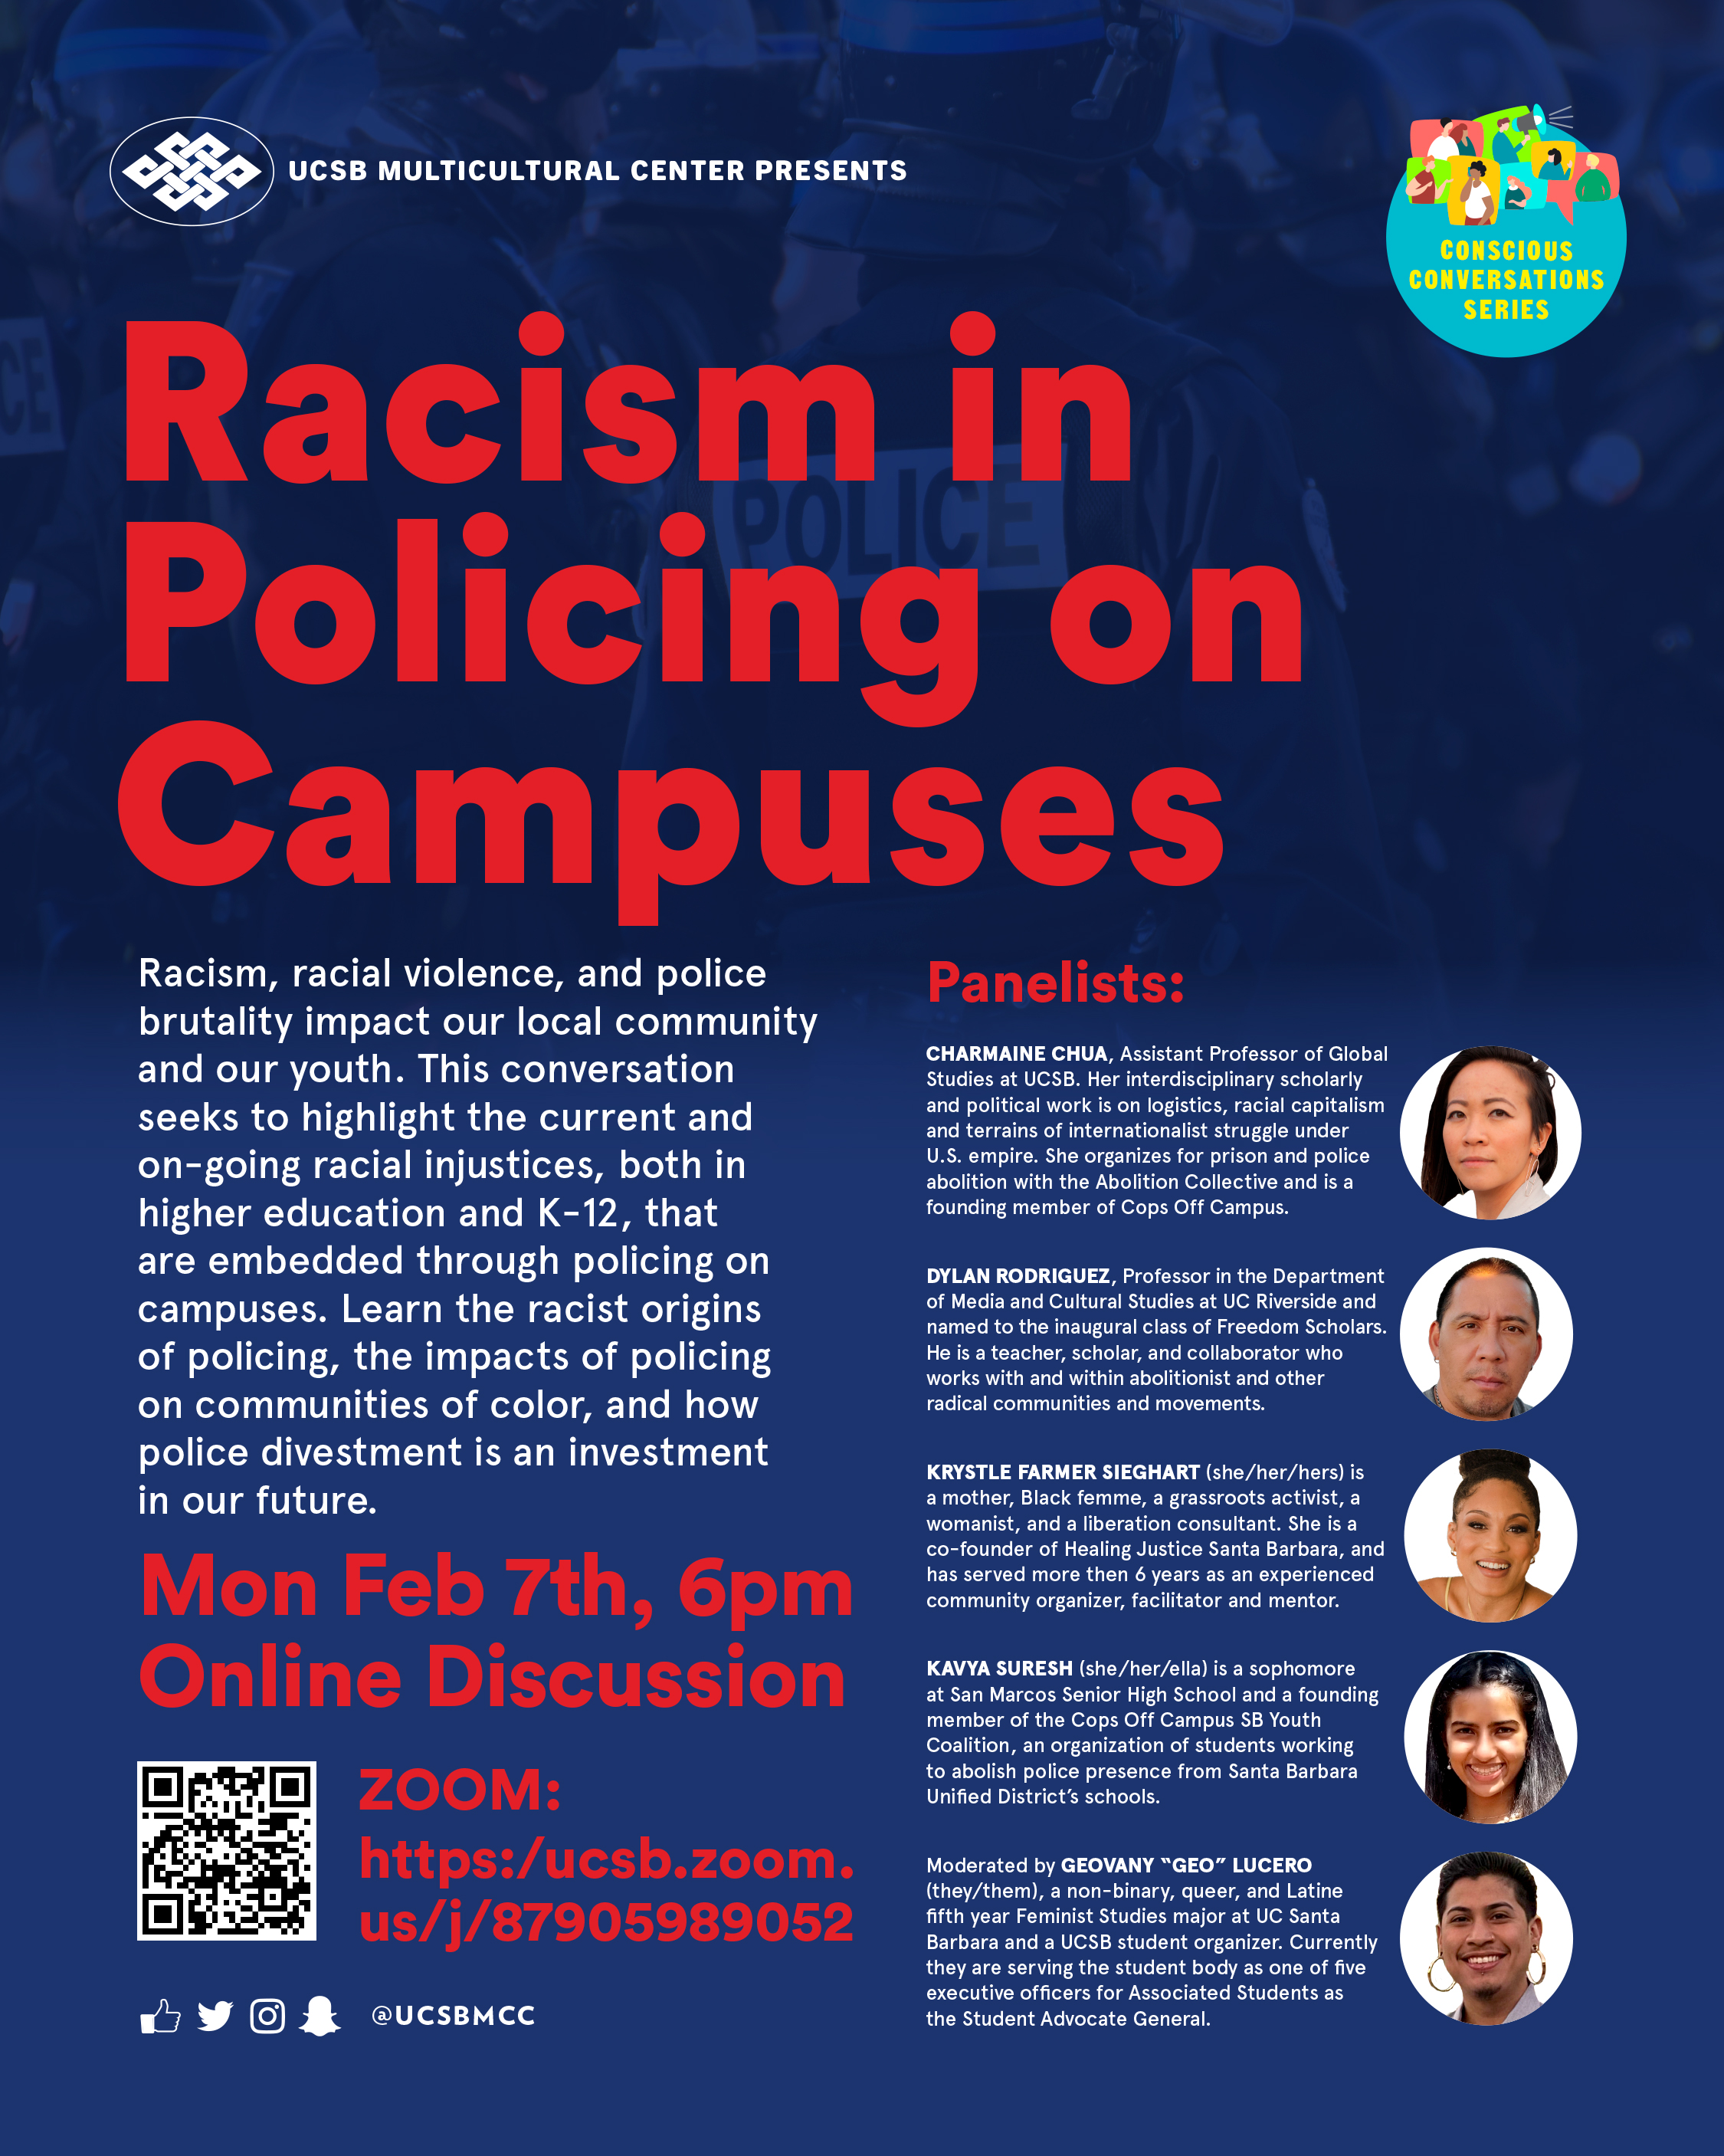 Racism in Policing on Campuses